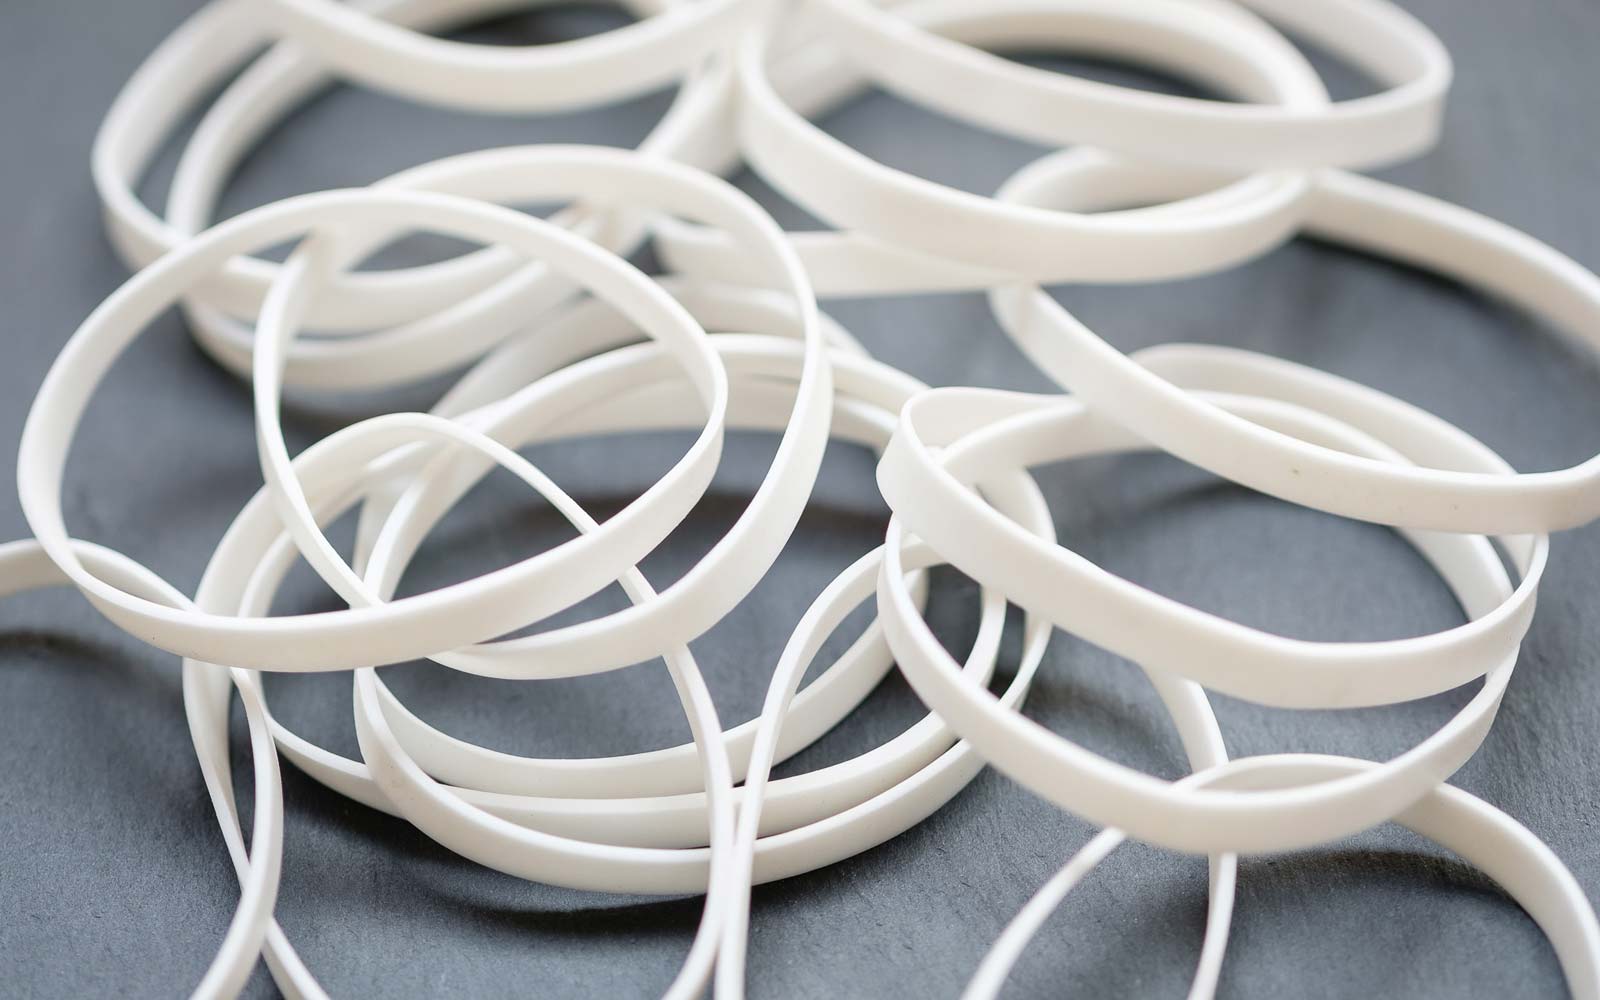 https://www.bestrubberband.com/_data/media/pix/_UP/silicone-rubber-bands-1.jpg